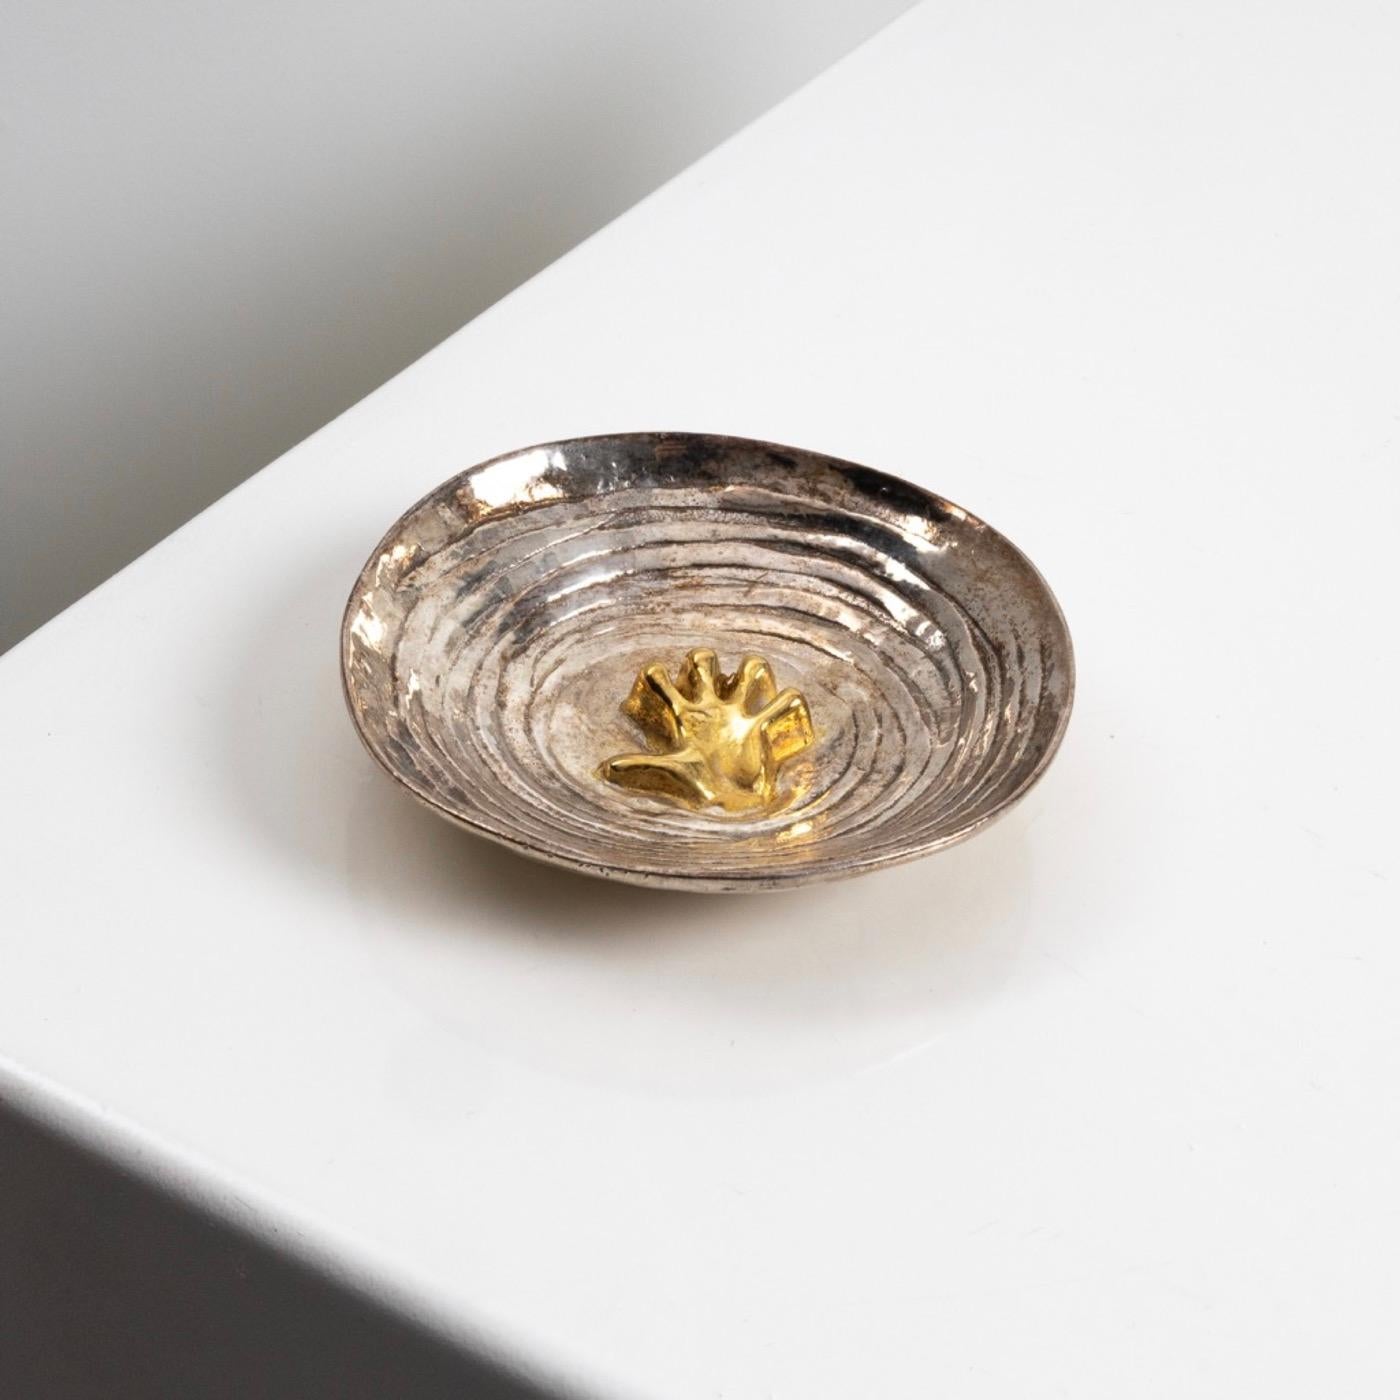 This pocket emptier reprensents a small hand in the sea waves.
The cup is made of silvered bronze while the hand is gilded.
The theme of the sea, recurrent in the work of Line Vautrin is used here for this poetic object of which we know several